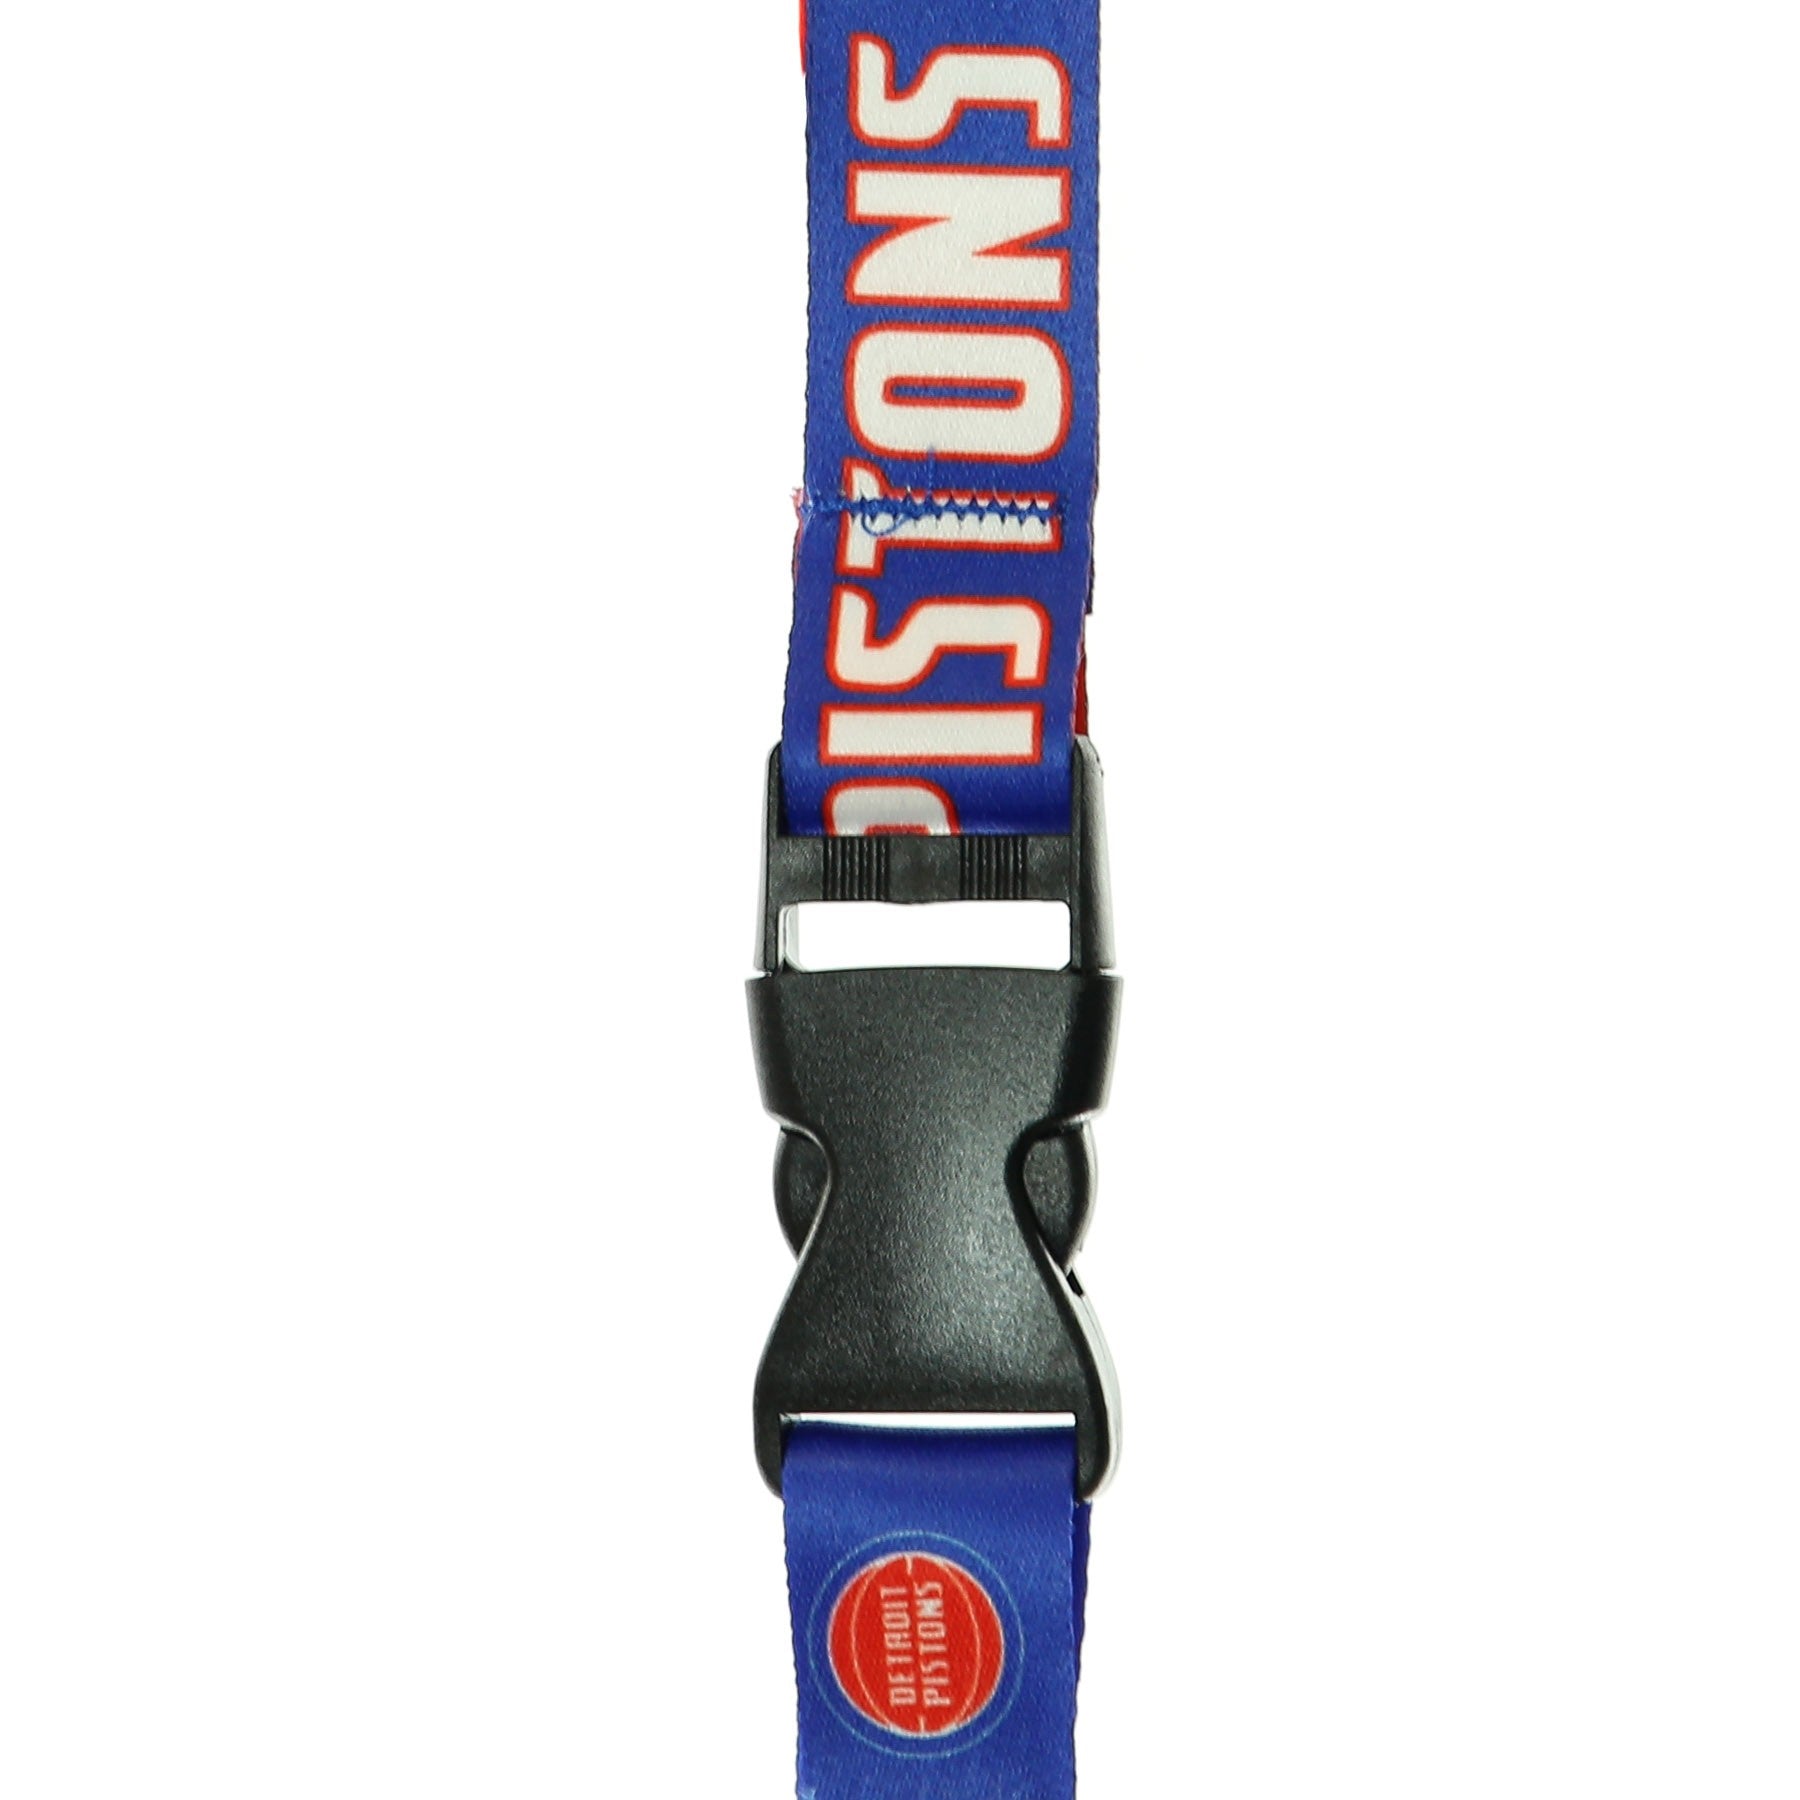 Unisex Nba Lanyard Keychain With Buckle Detpit Original Team Colors